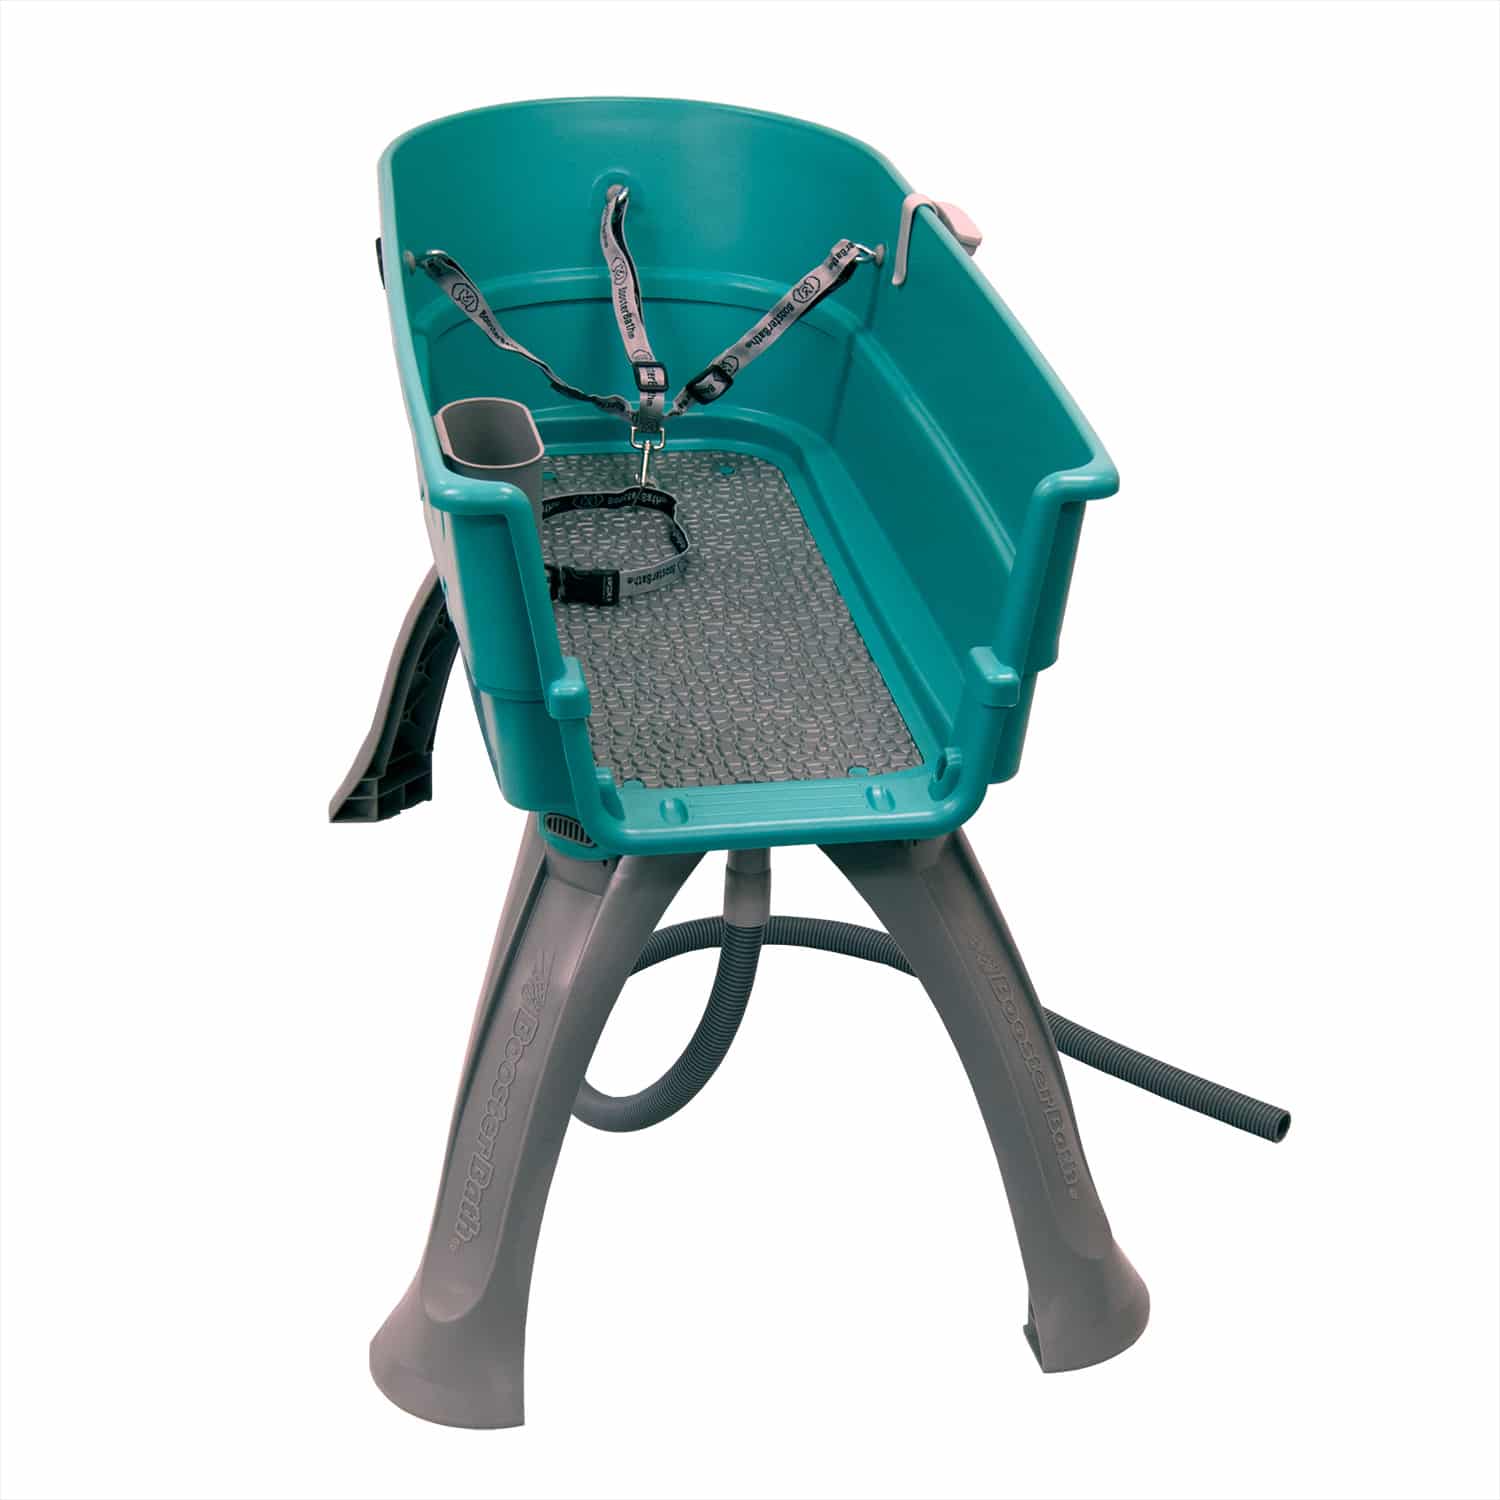 bb-large-teal Elevated Dog Bath and Grooming Center